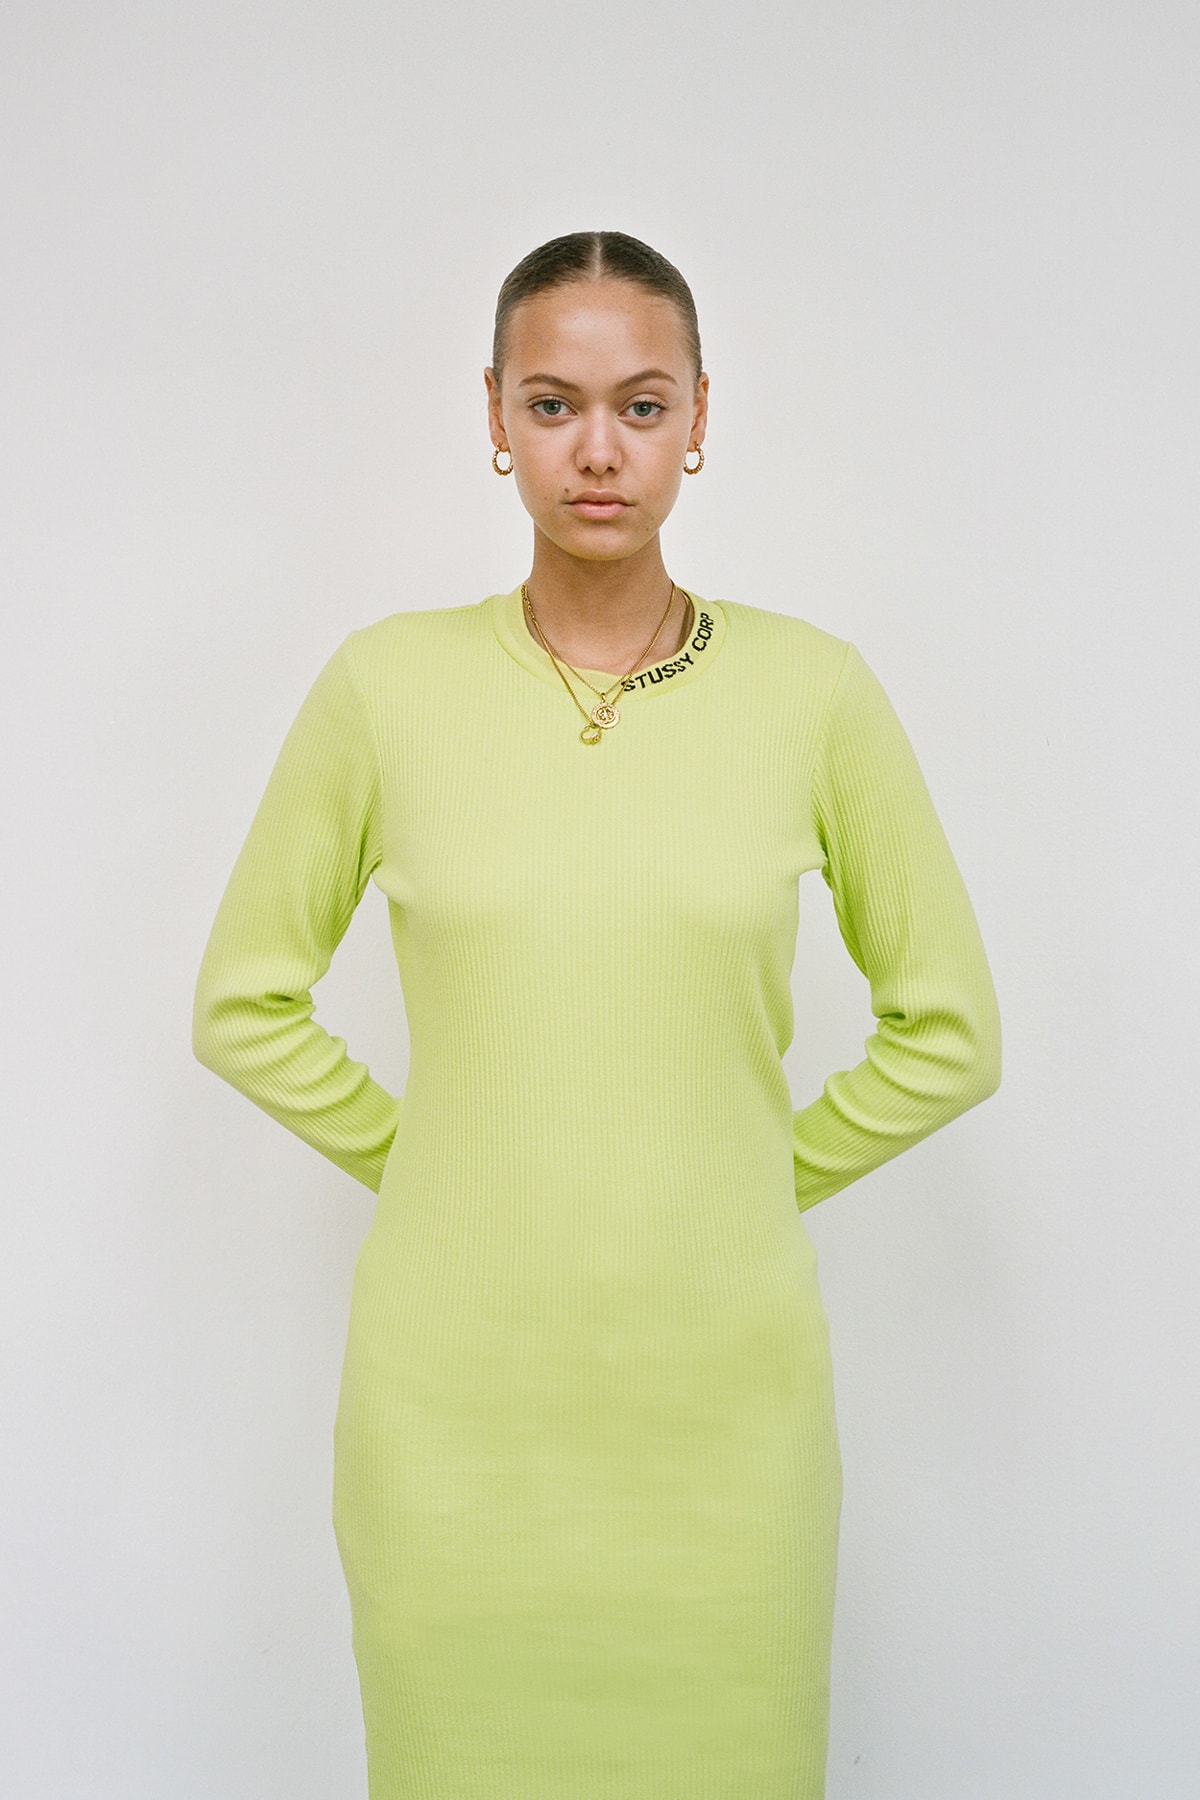 Stussy Women's Holiday 2018 Collection Lookbook Dress Bright Green